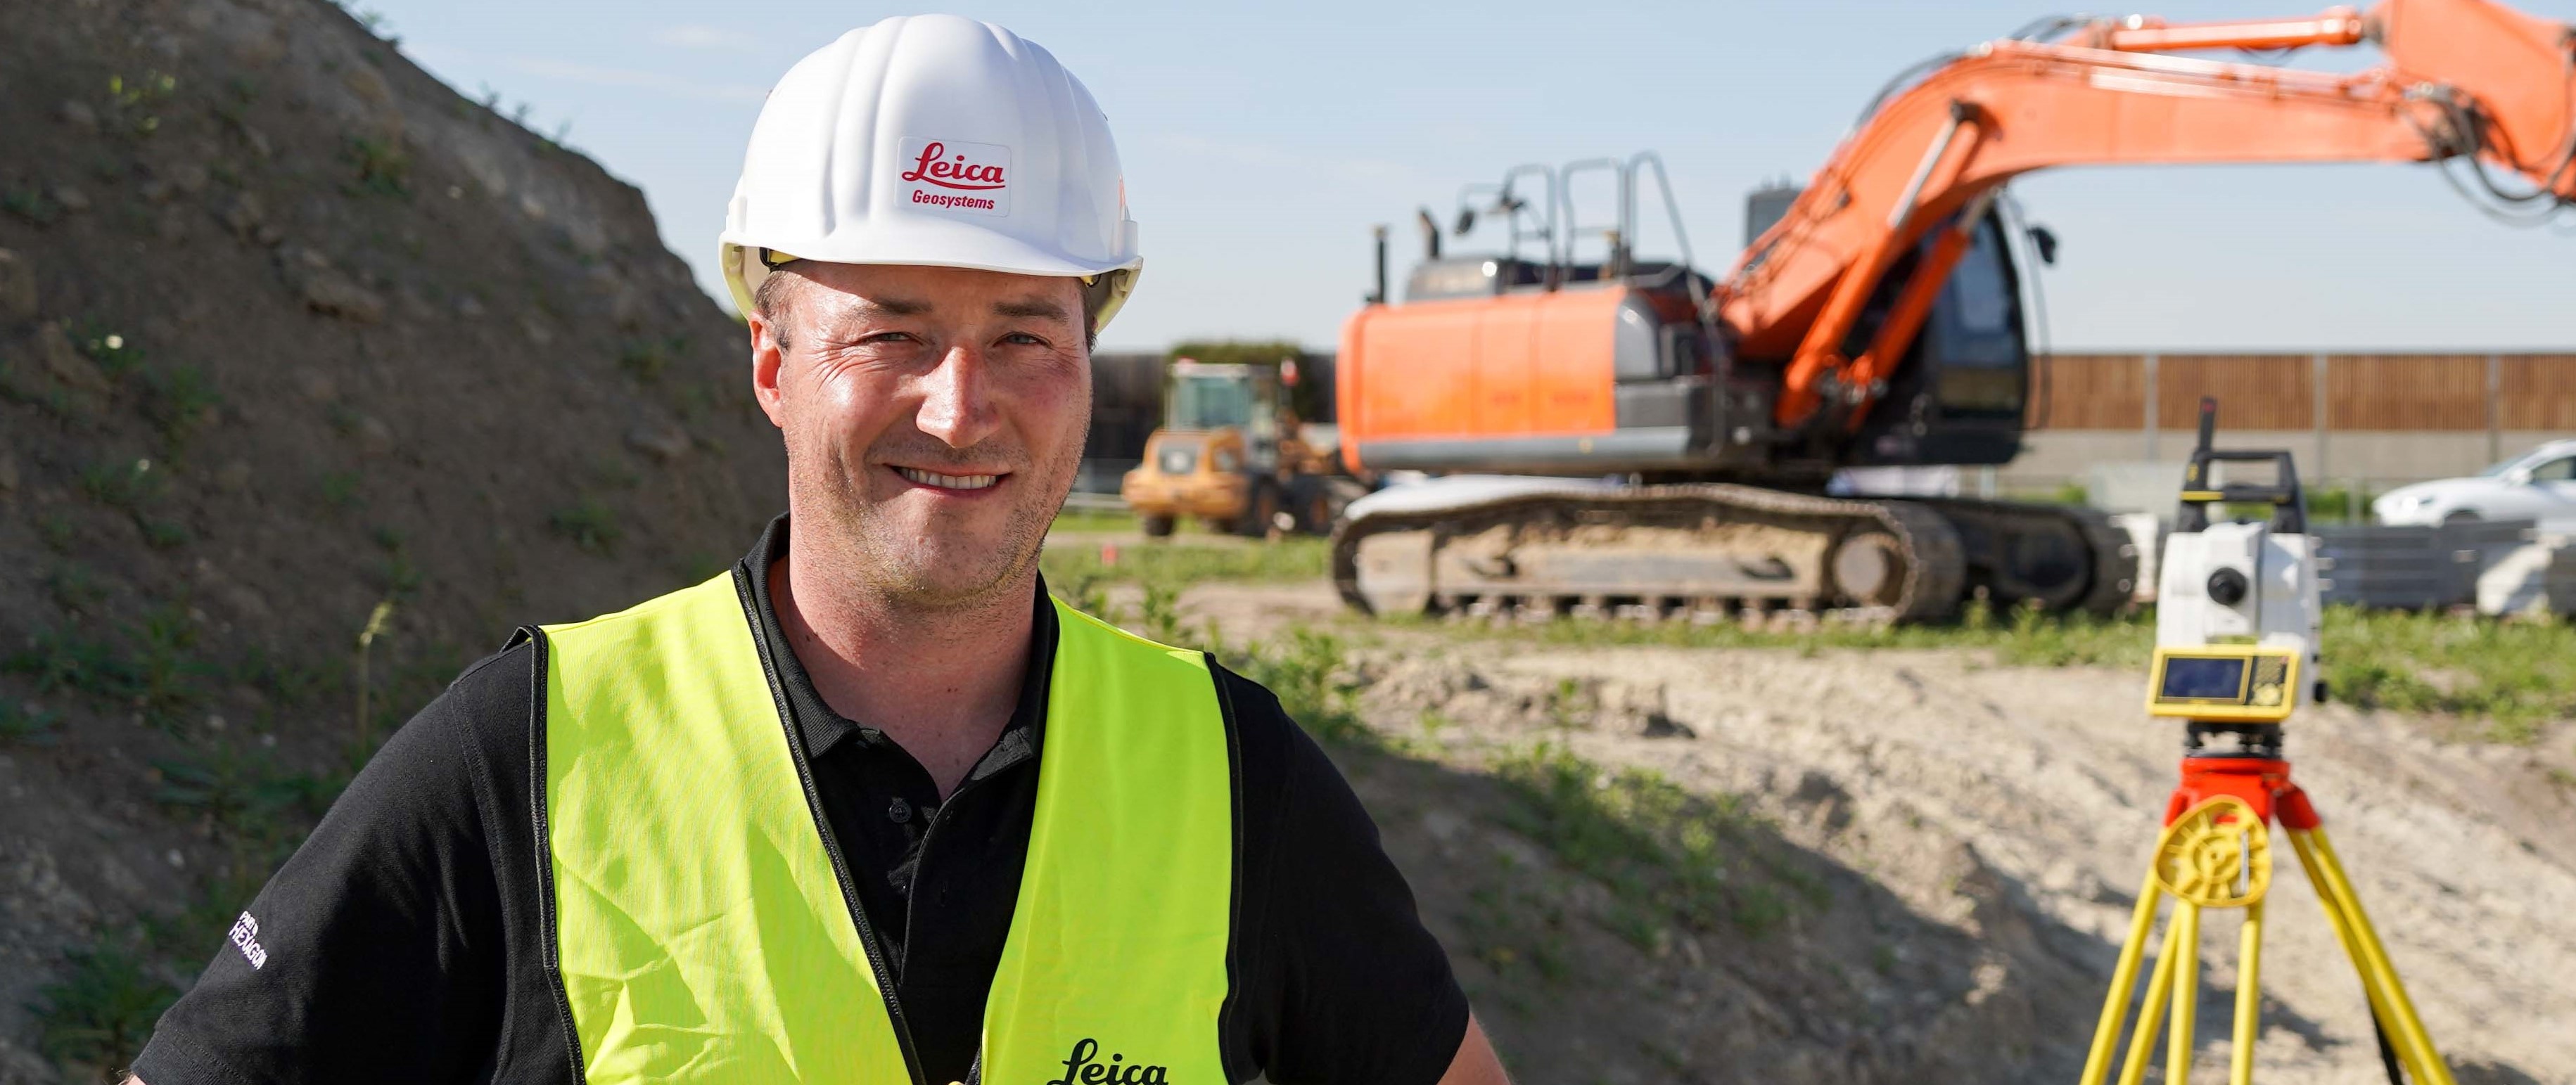 The new PA10 system from Leica Geosystems will help boost site safety for personnel